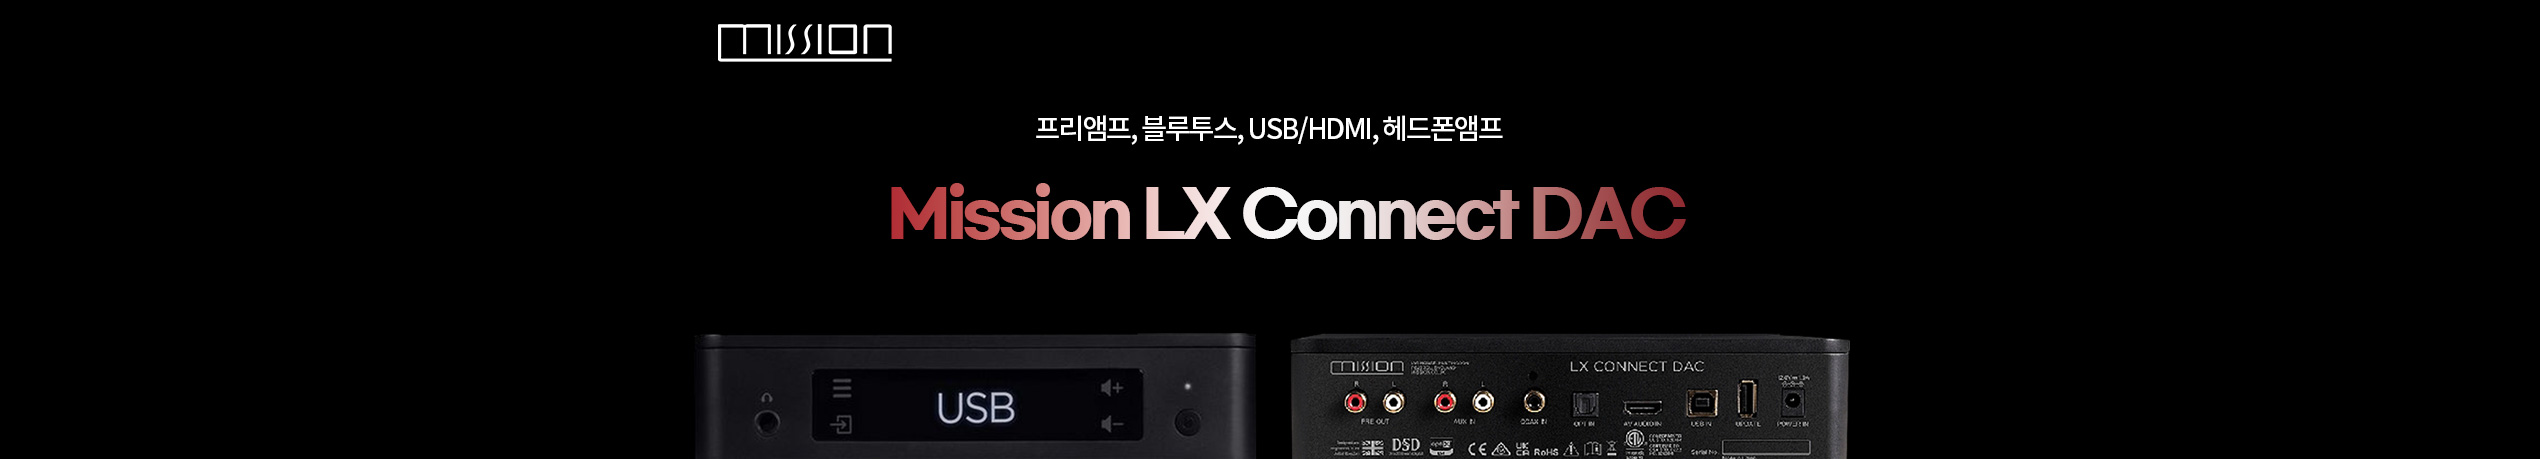 mission lx connect dac